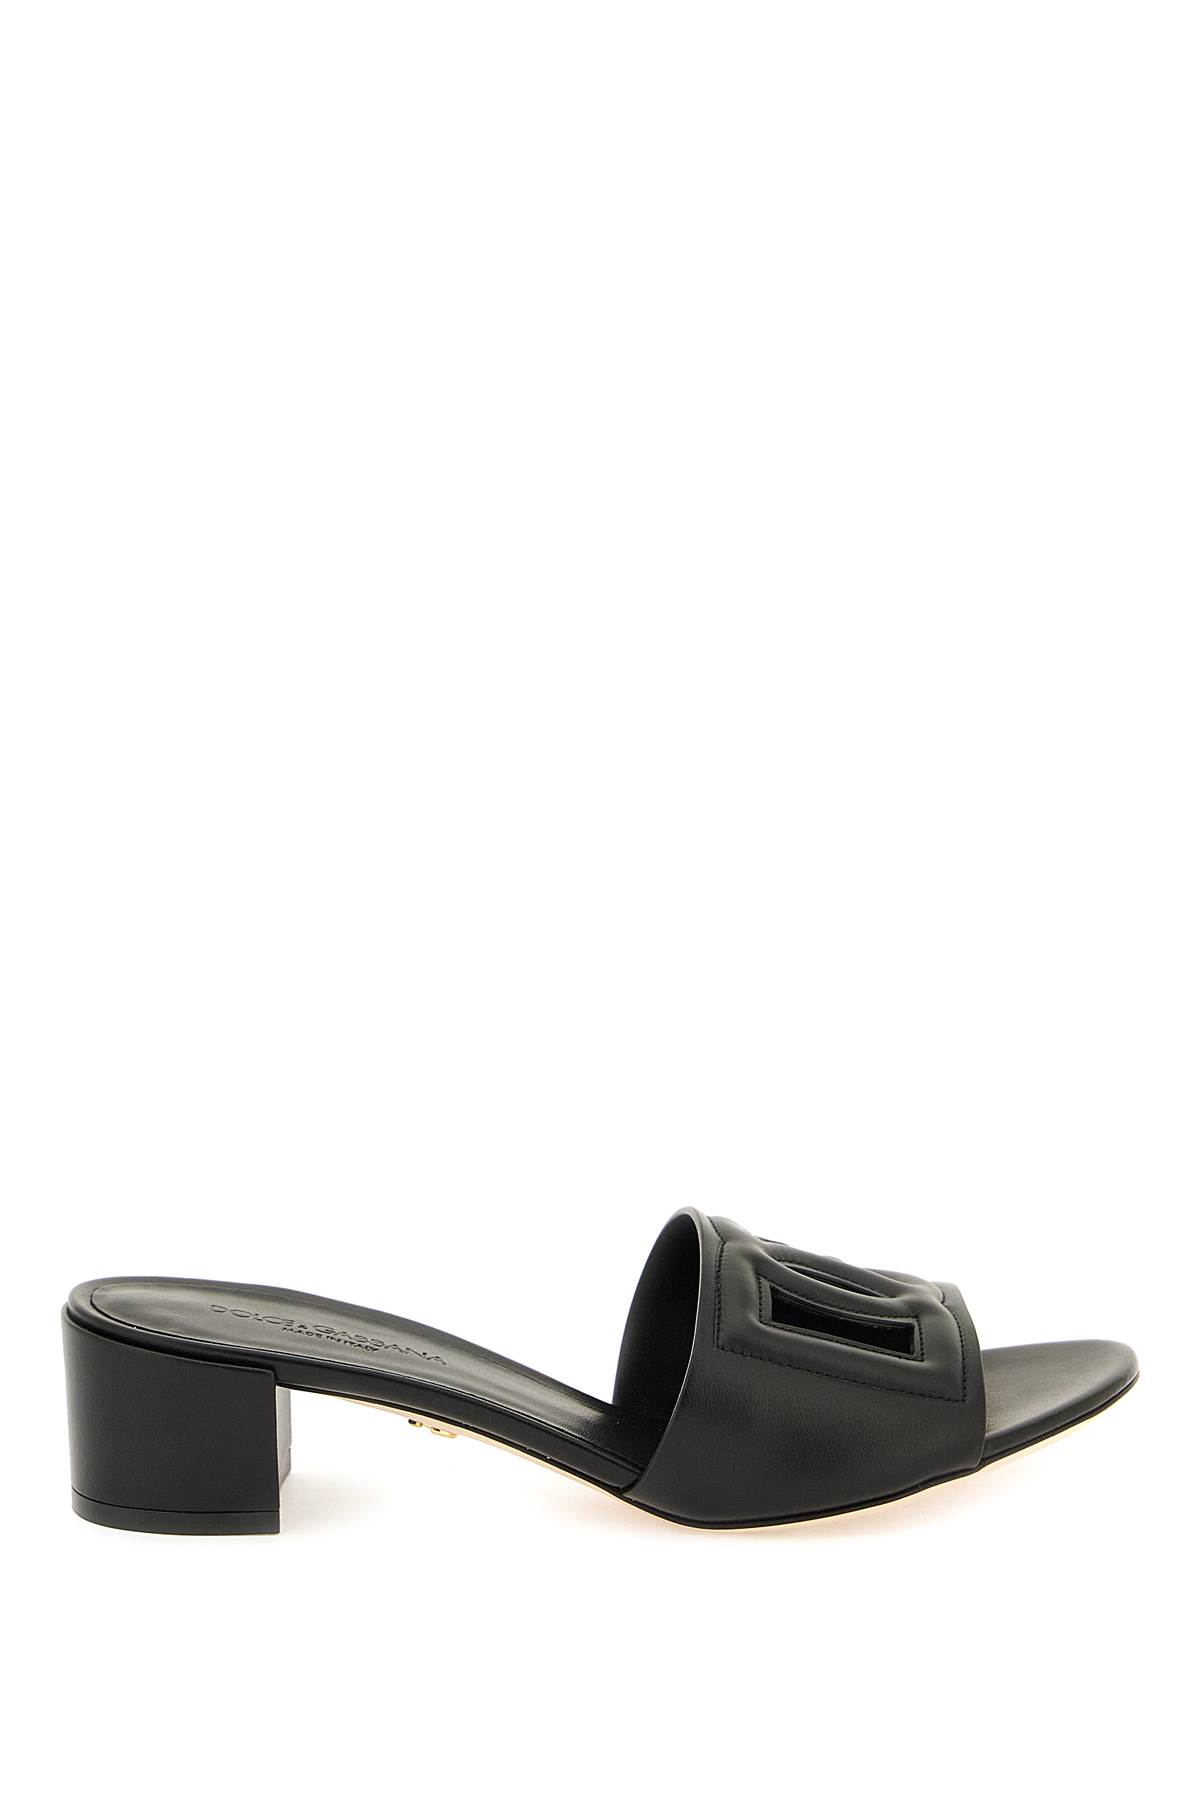 Dolce & Gabbana Mules With Cut-out In Black